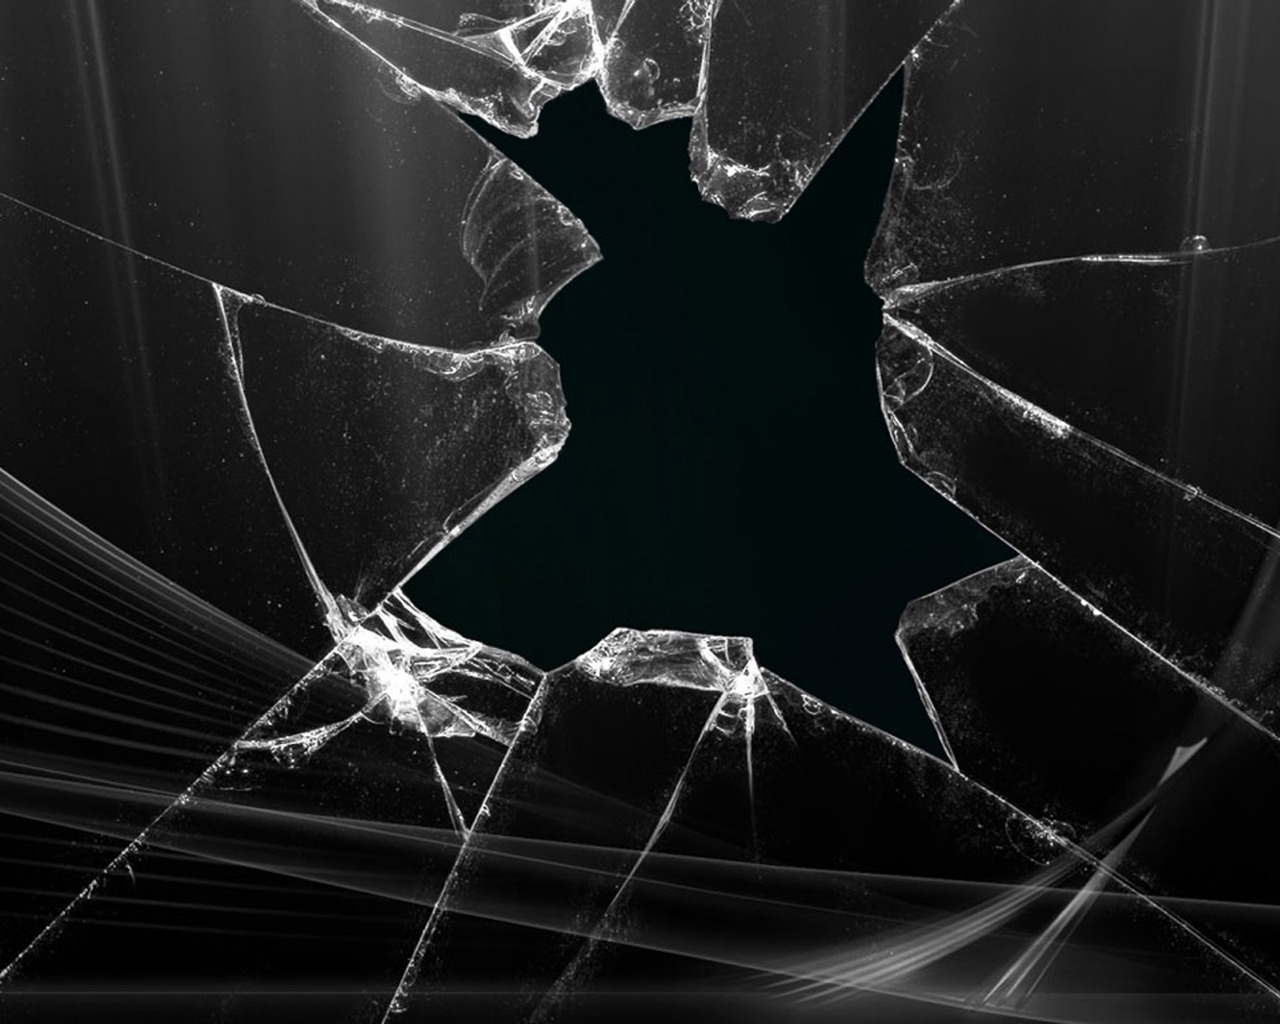 Cracked Glass for 1280 x 1024 resolution